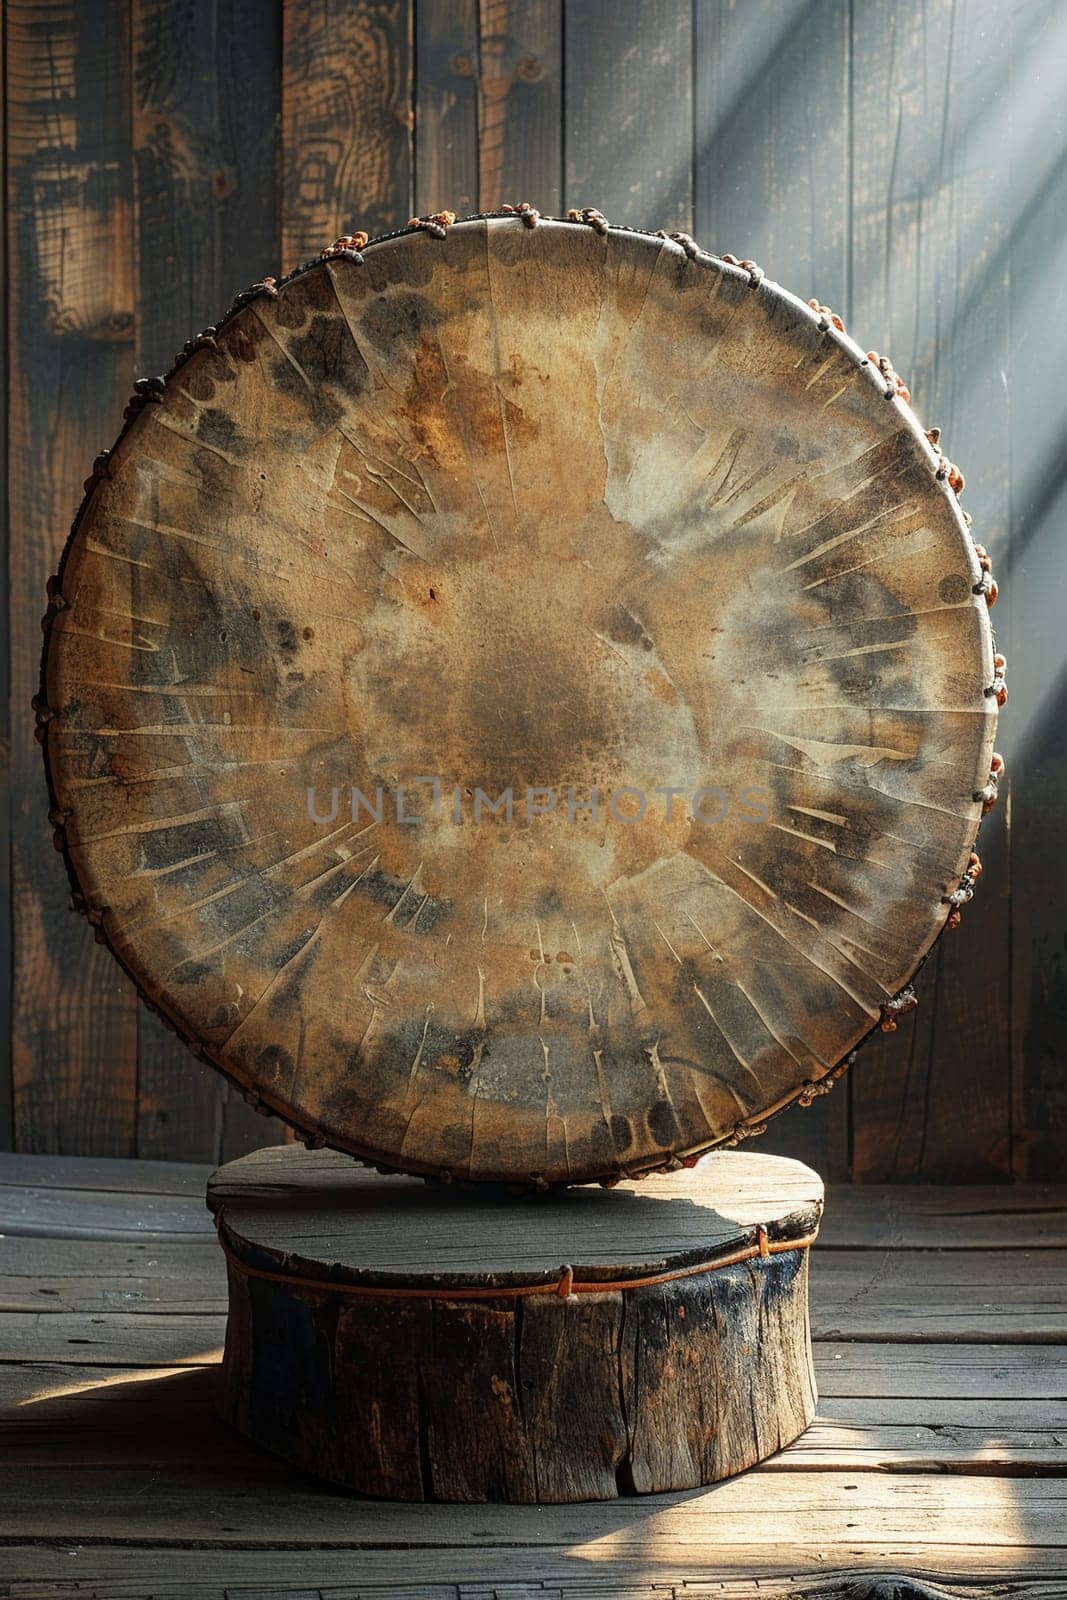 Shamanic Drum Ready for Spiritual Journeying, The instrument blurs into the shadows, a portal to other realms and inner wisdom.